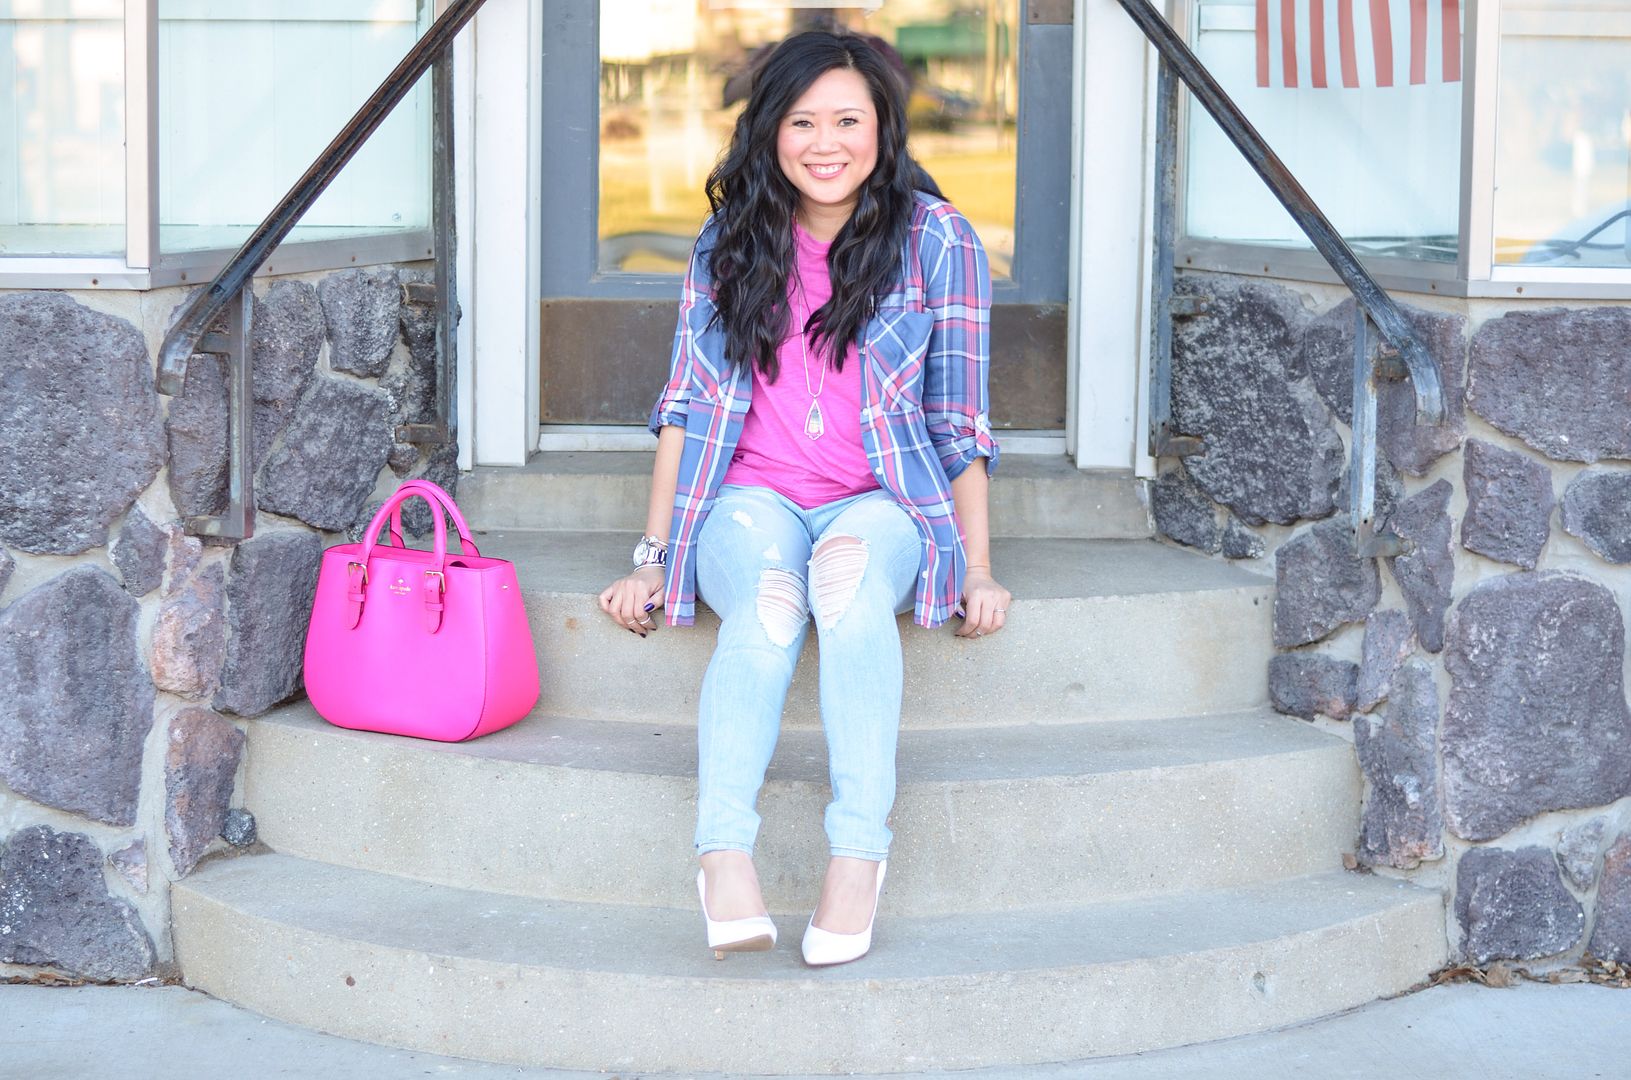 Plaid shirt worn over a tee with destroyed jeans and white pumps